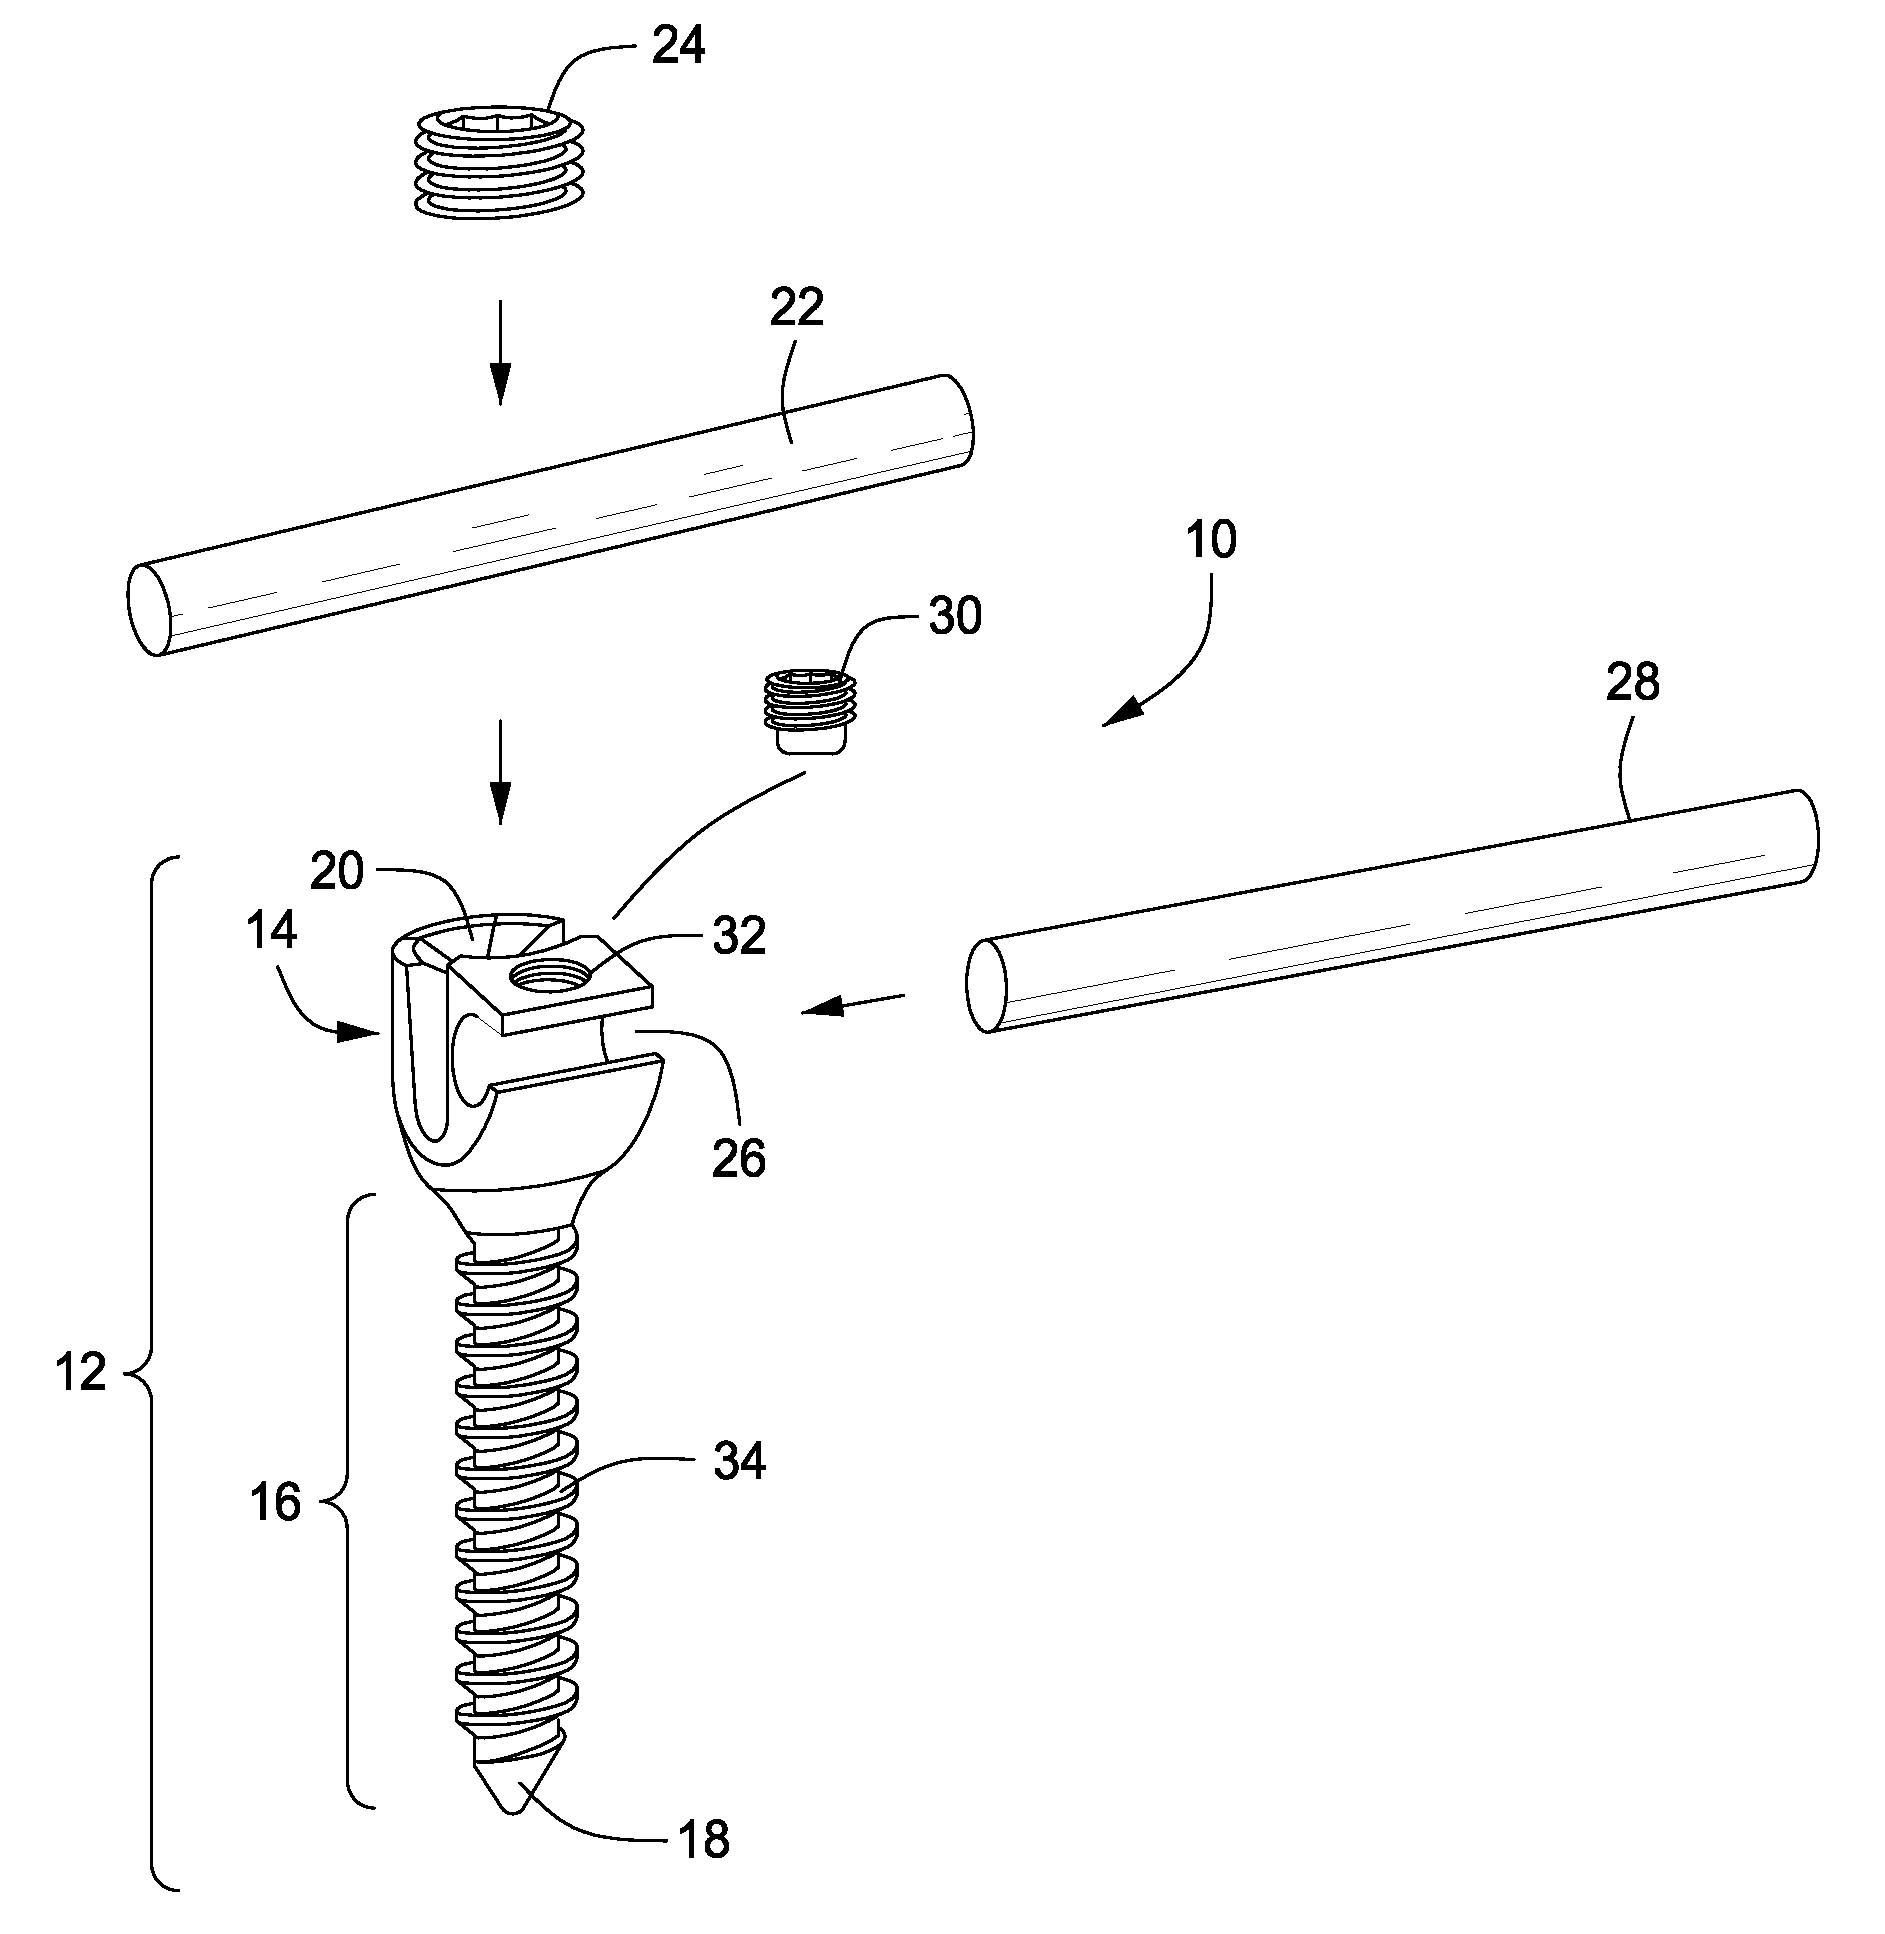 Orthopedic Fastener for Stabilization and Fixation